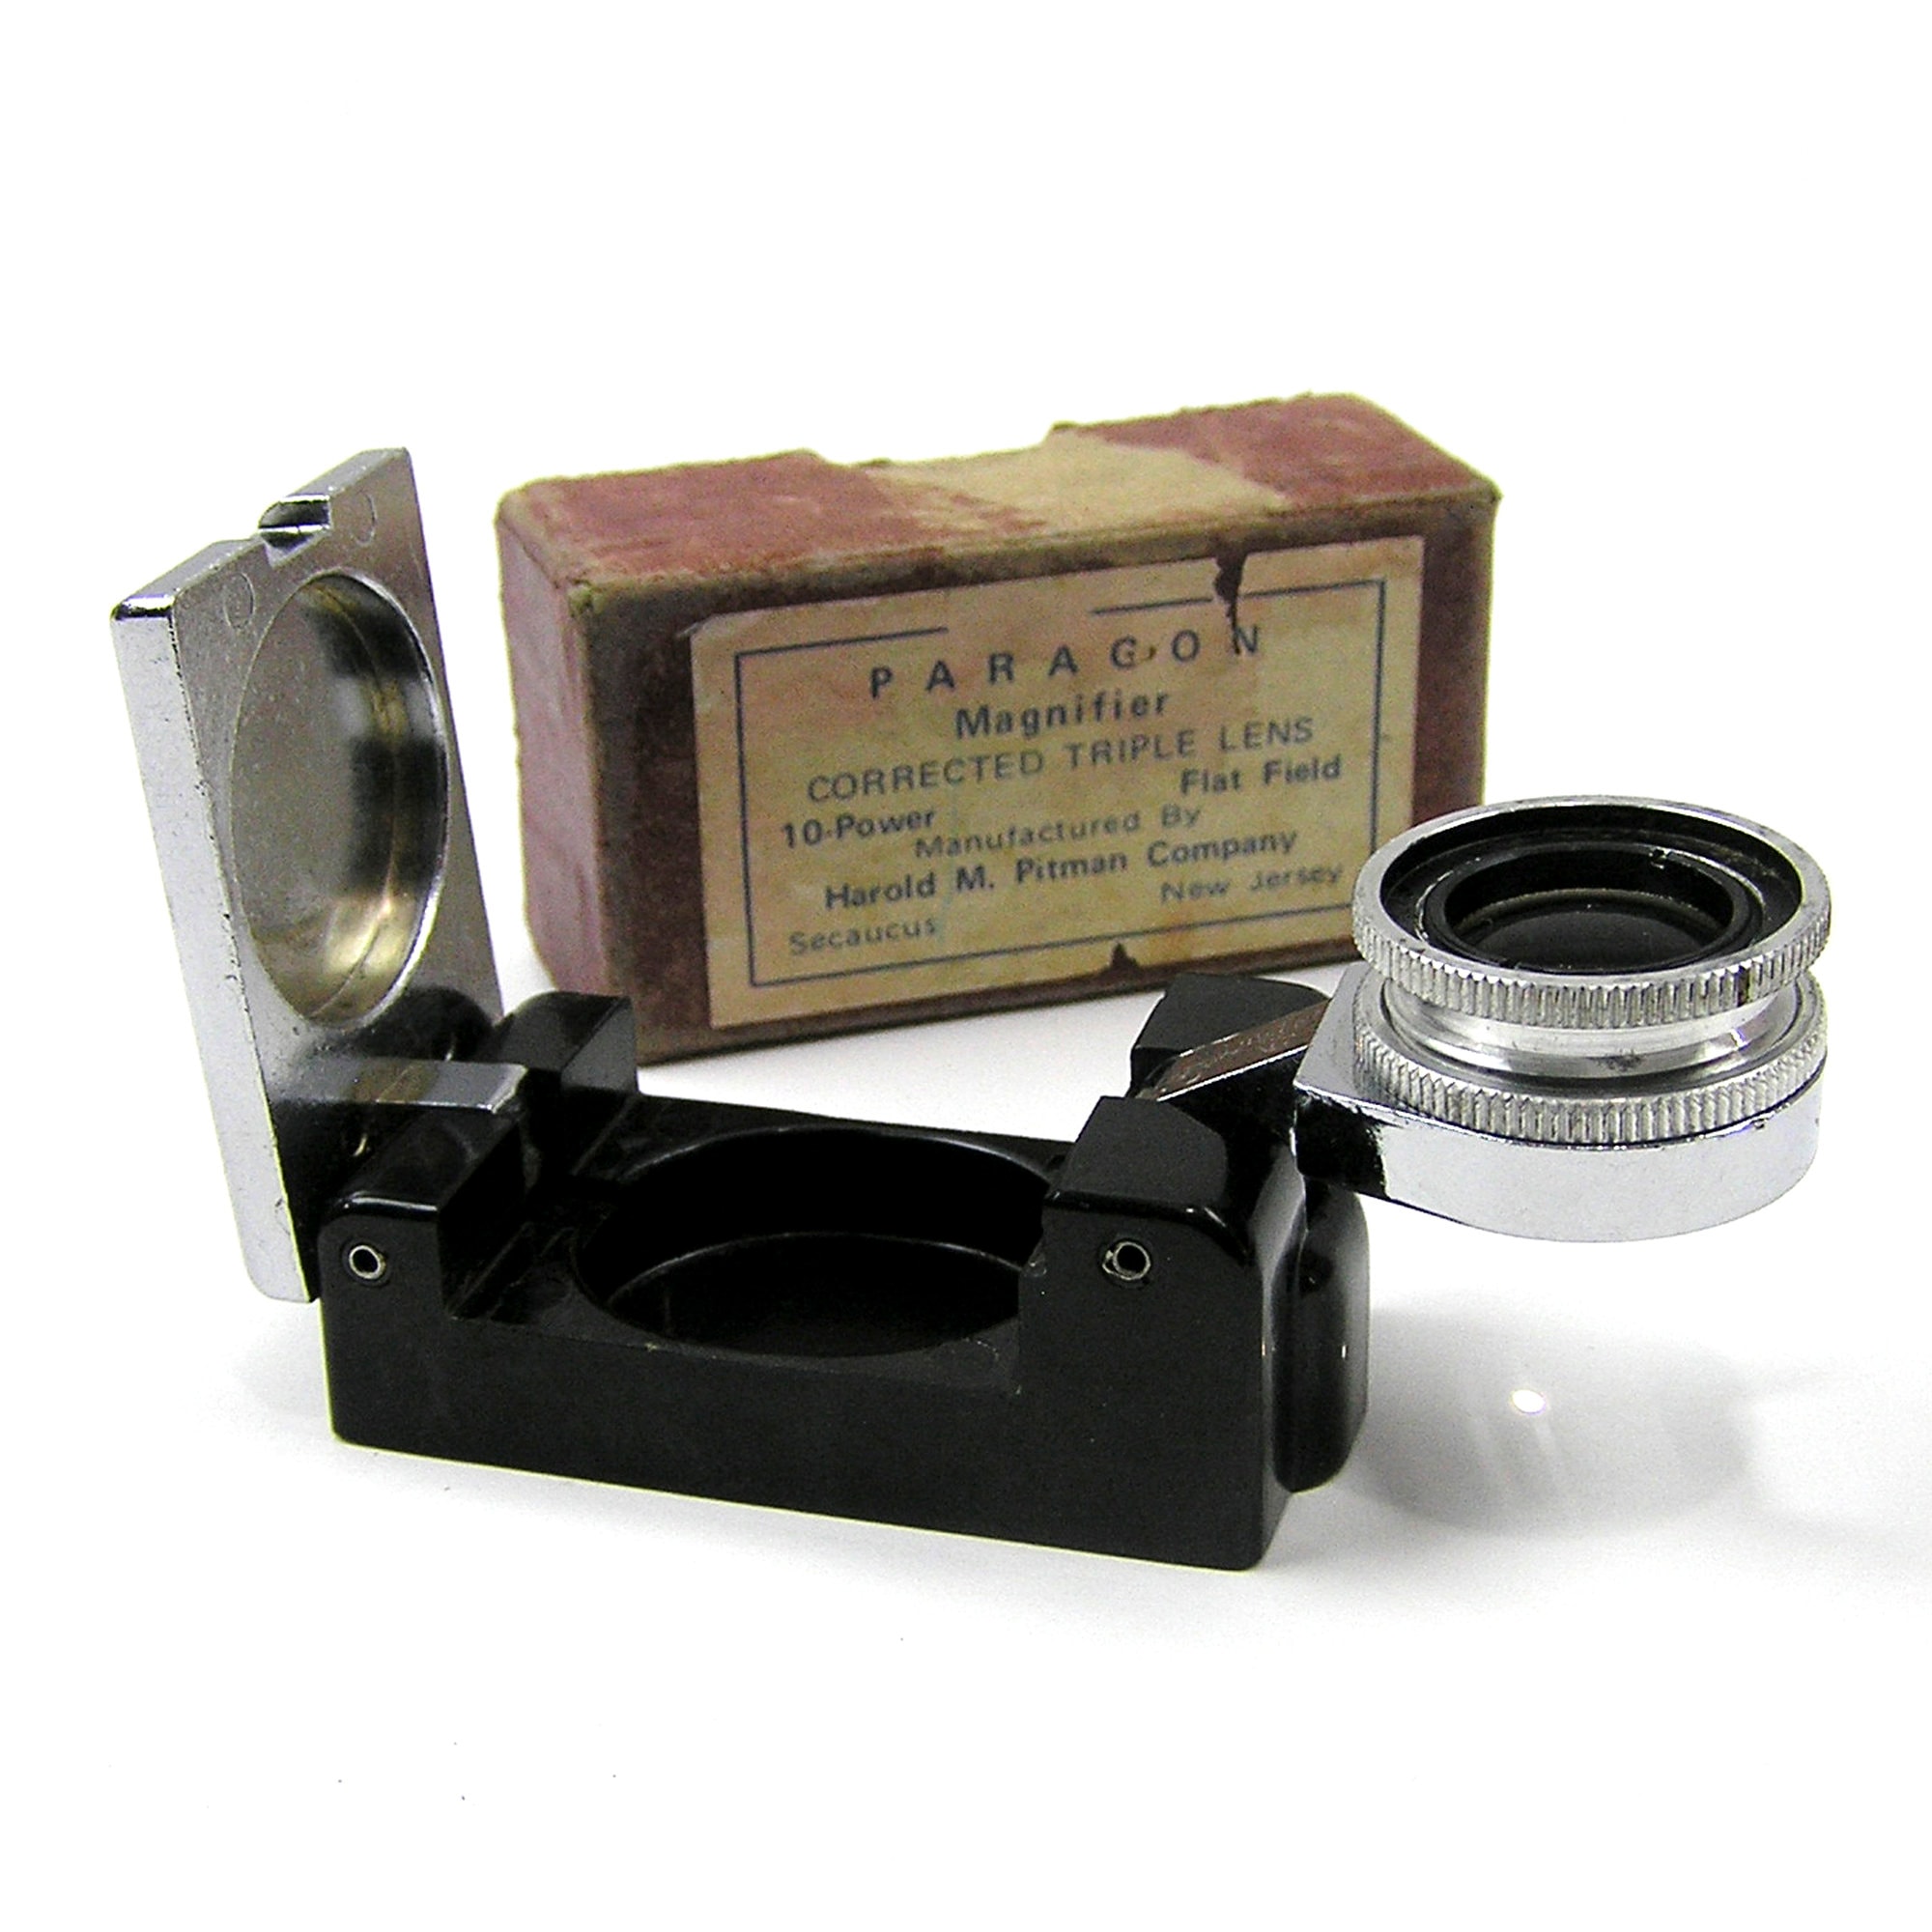 JEWELERS Magnifying LOUPE 30x 30 Power 21mm Triplet Lens Silver Finish  MAGNIFY Glass for Jewelry Magnify Jewelry Art Stamps Coins Geology 